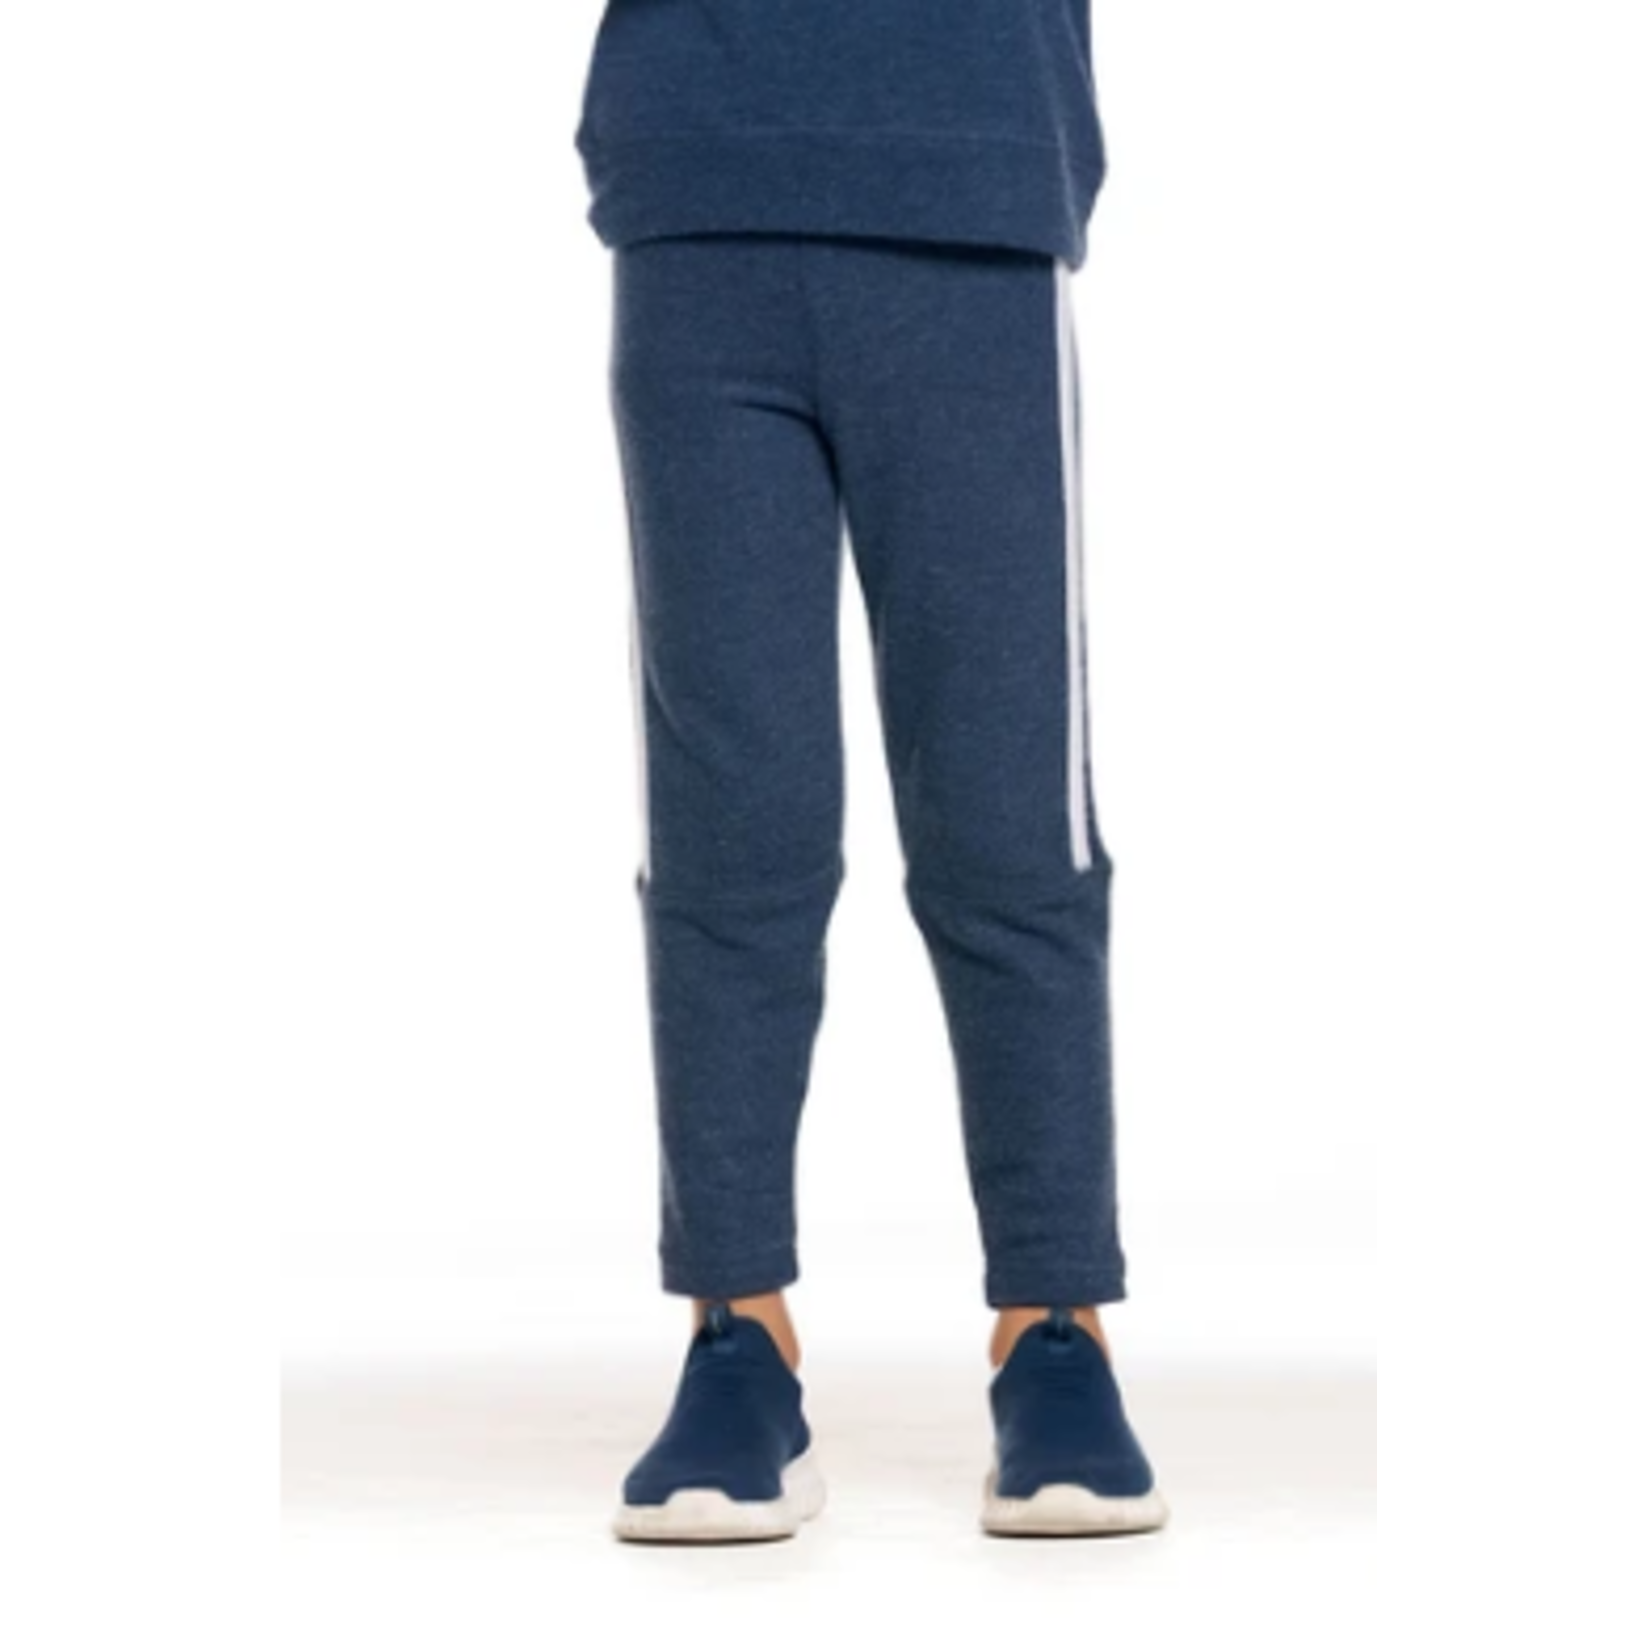 CHASER KNIT CUFF KIDS NAVY JOGGER